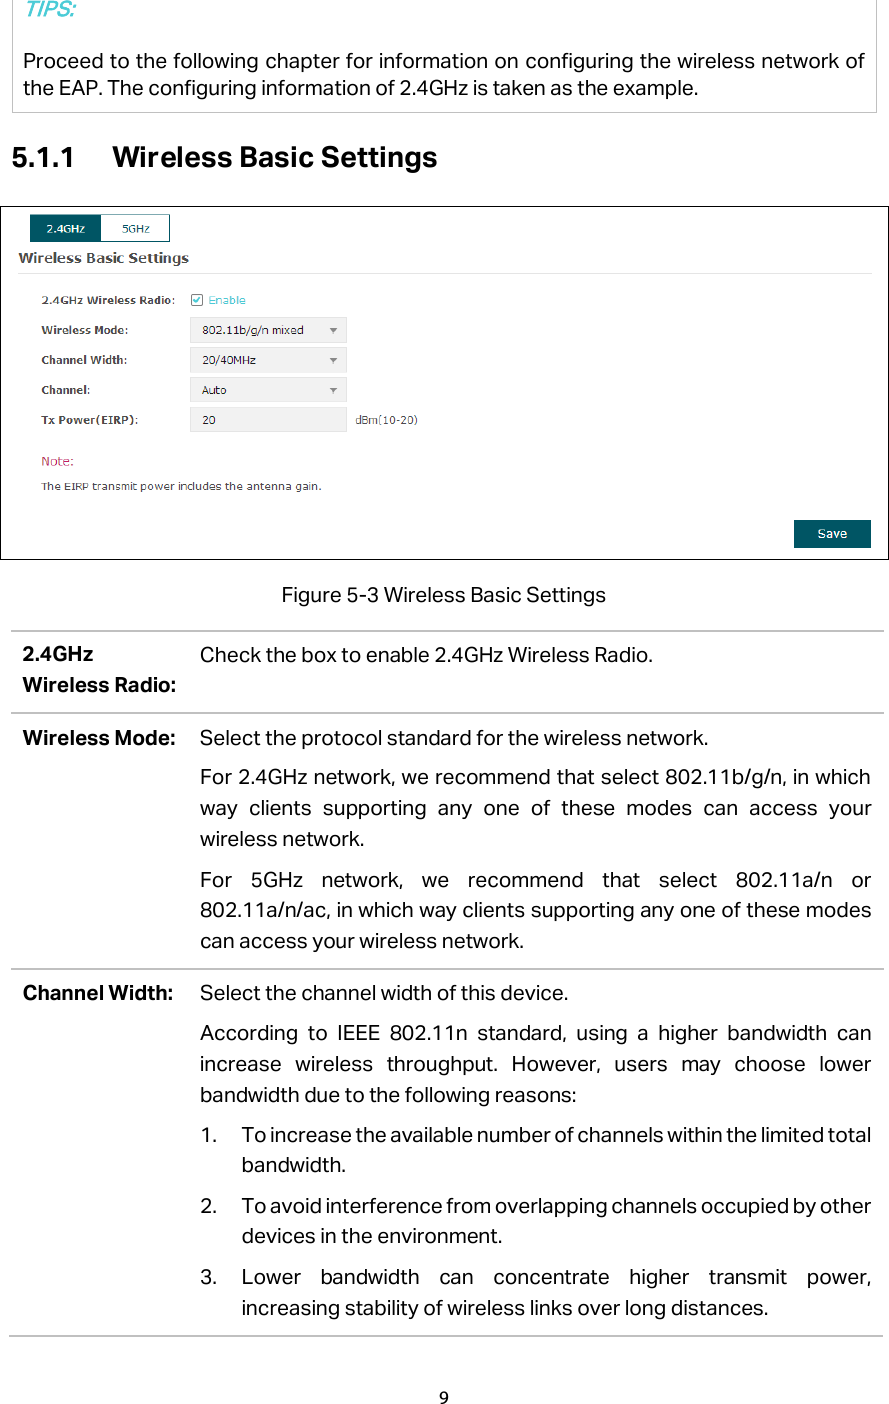  5.1.1 Wireless Basic Settings  Figure 5-3 Wireless Basic Settings 2.4GHz Wireless Radio: Check the box to enable 2.4GHz Wireless Radio. Wireless Mode: Select the protocol standard for the wireless network.   For 2.4GHz network, we recommend that select 802.11b/g/n, in which way clients supporting any one of these modes can access your wireless network. For 5GHz network, we recommend that select 802.11a/n or 802.11a/n/ac, in which way clients supporting any one of these modes can access your wireless network. Channel Width: Select the channel width of this device.   According to IEEE 802.11n standard, using a higher bandwidth can increase wireless throughput. However, users may choose lower bandwidth due to the following reasons: 1. To increase the available number of channels within the limited total bandwidth. 2. To avoid interference from overlapping channels occupied by other devices in the environment. 3. Lower bandwidth can concentrate higher transmit power, increasing stability of wireless links over long distances. TIPS: Proceed to the following chapter for information on configuring the wireless network of the EAP. The configuring information of 2.4GHz is taken as the example.   9  